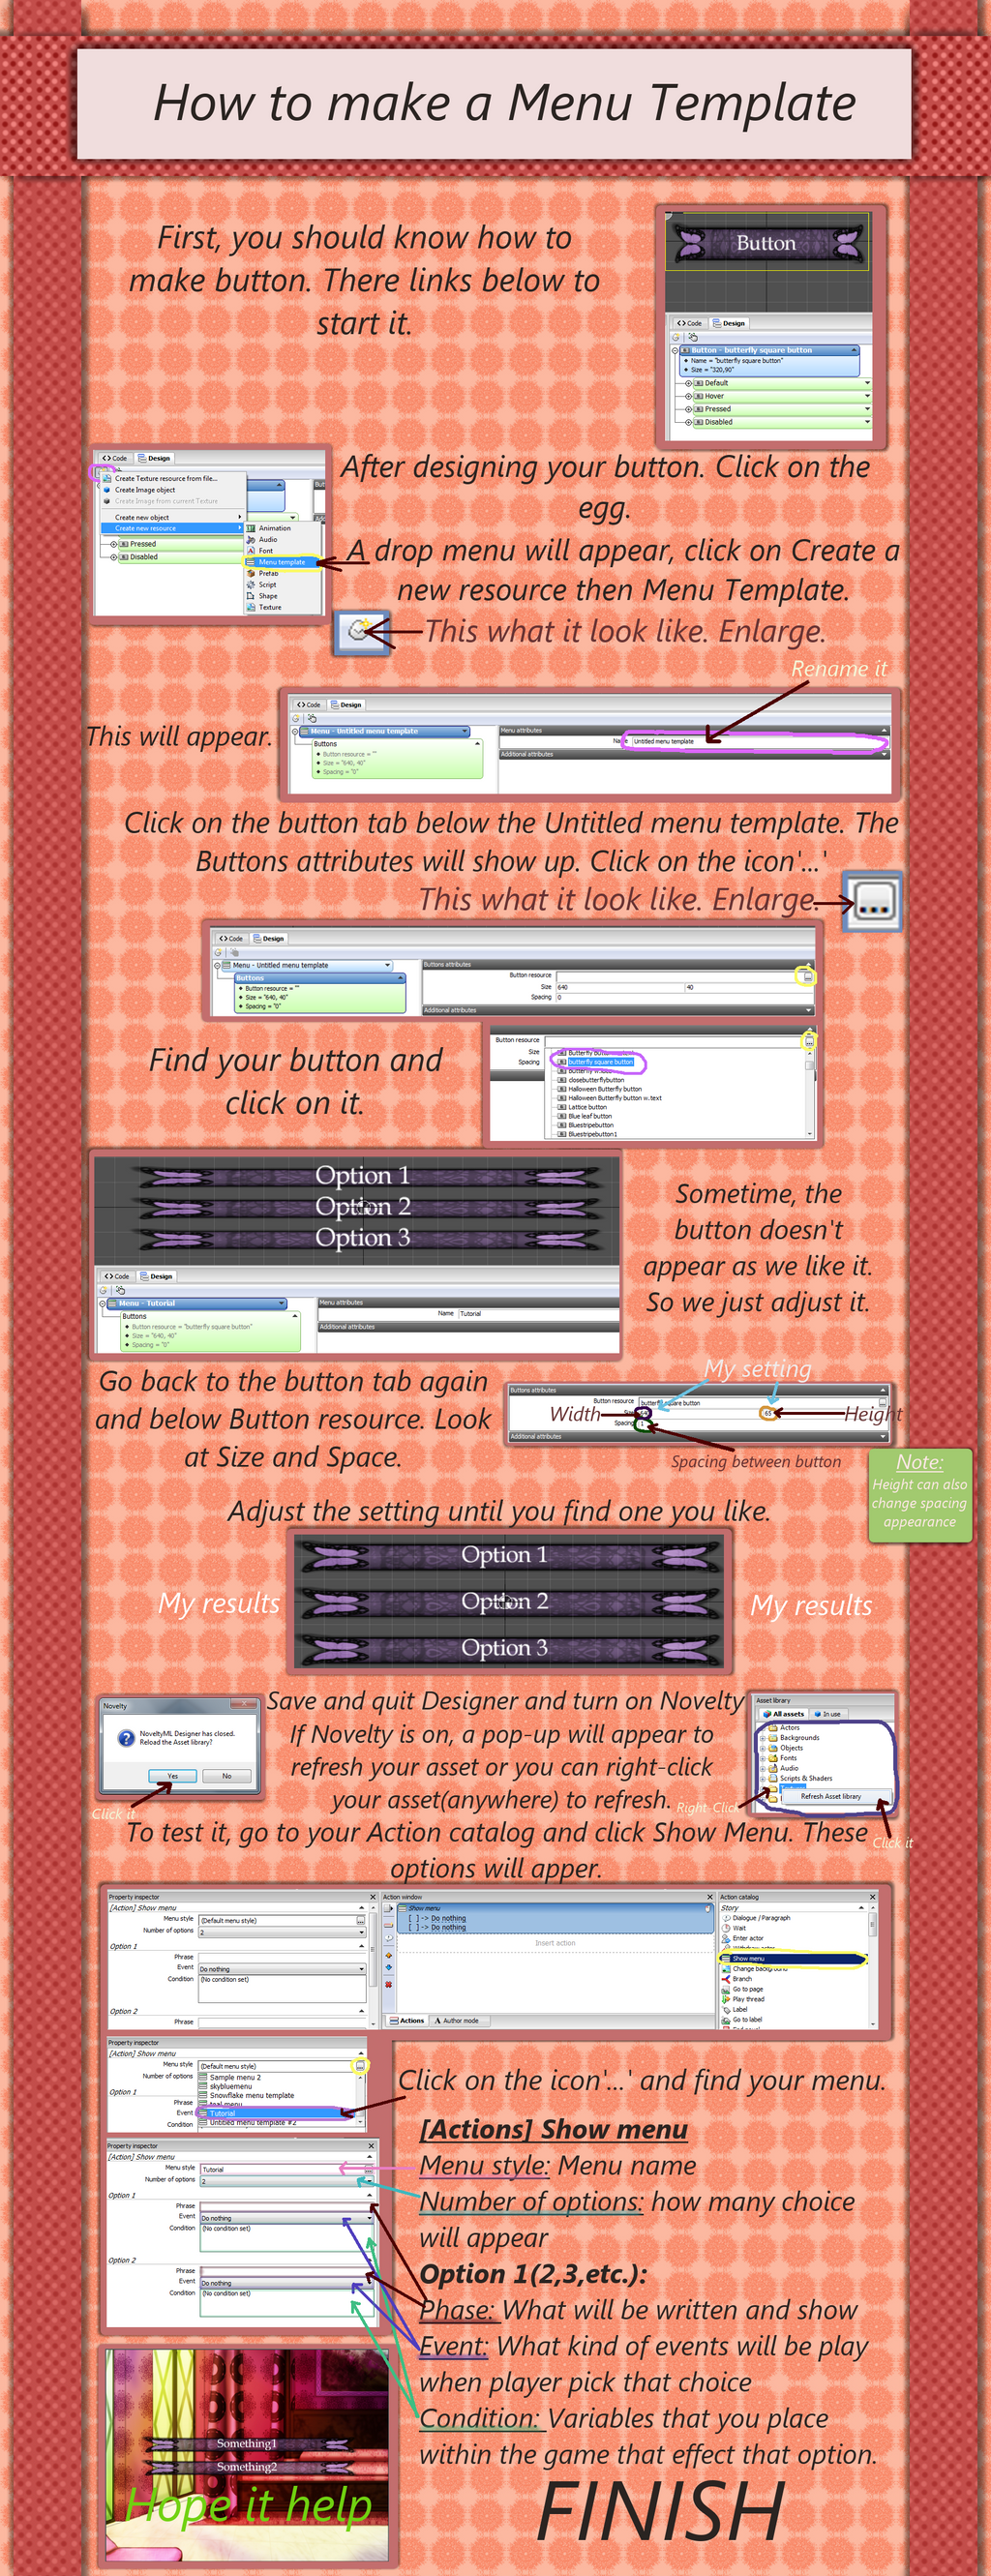 how-to-make-a-basic-menu-template-by-afiniwind-on-deviantart